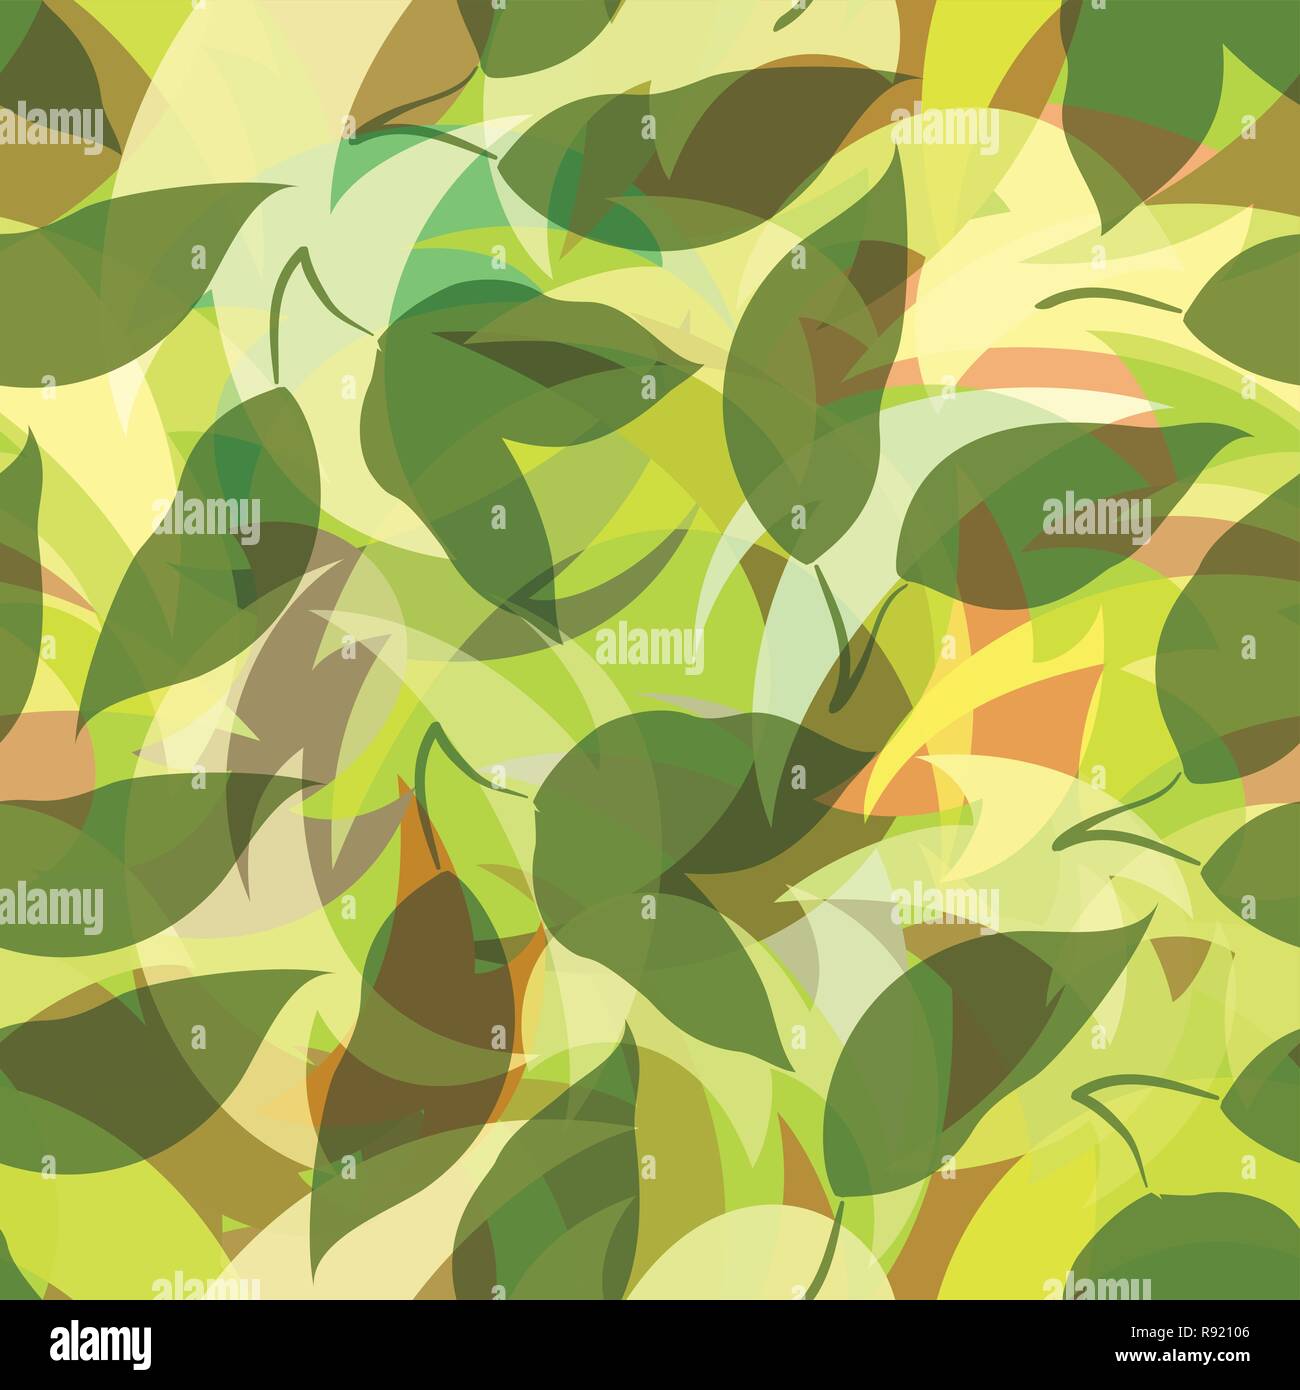 Seamless Background, Green Leaves Silhouettes on Abstract Tile Pattern. Vector Stock Vector